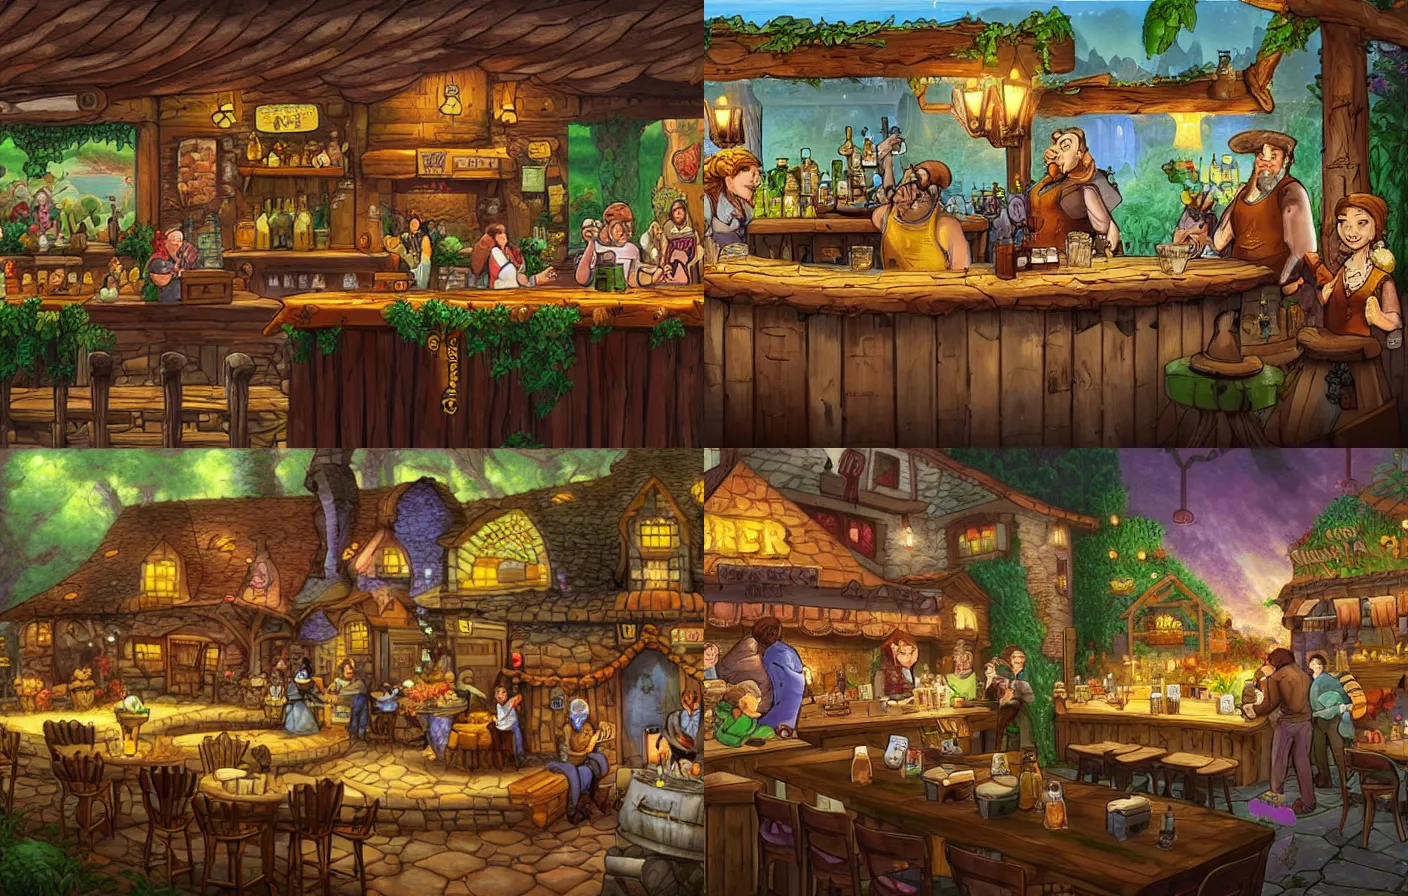 Prompt: a crowded rustic honey themed bar ran by bees and filled with bee patrons sitting at tables drinking nectar from mugs, from a fantasy point and click 2 d graphic adventure game, art inspired by thomas kinkade, king's quest, sierra entertainment games